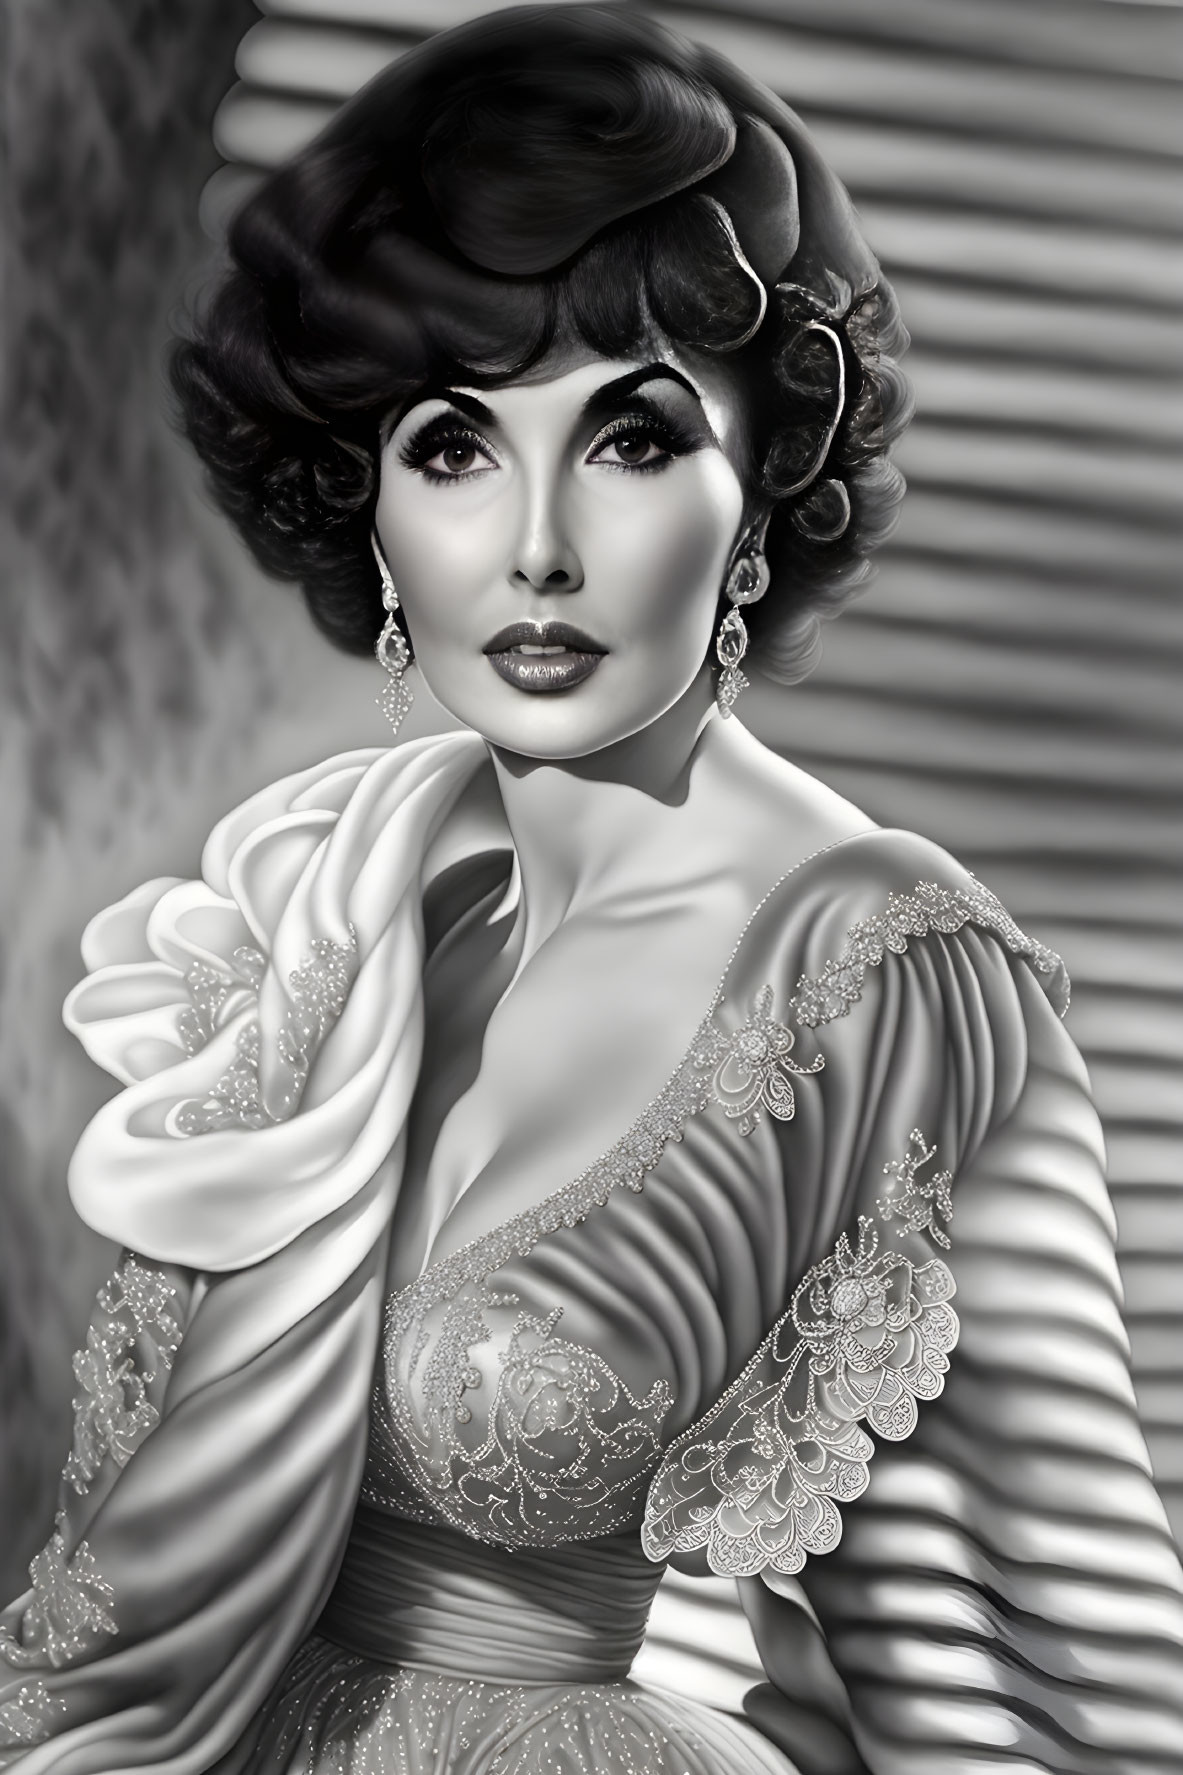 Vintage-inspired black and white portrait of a woman with ornate earrings and lace gown